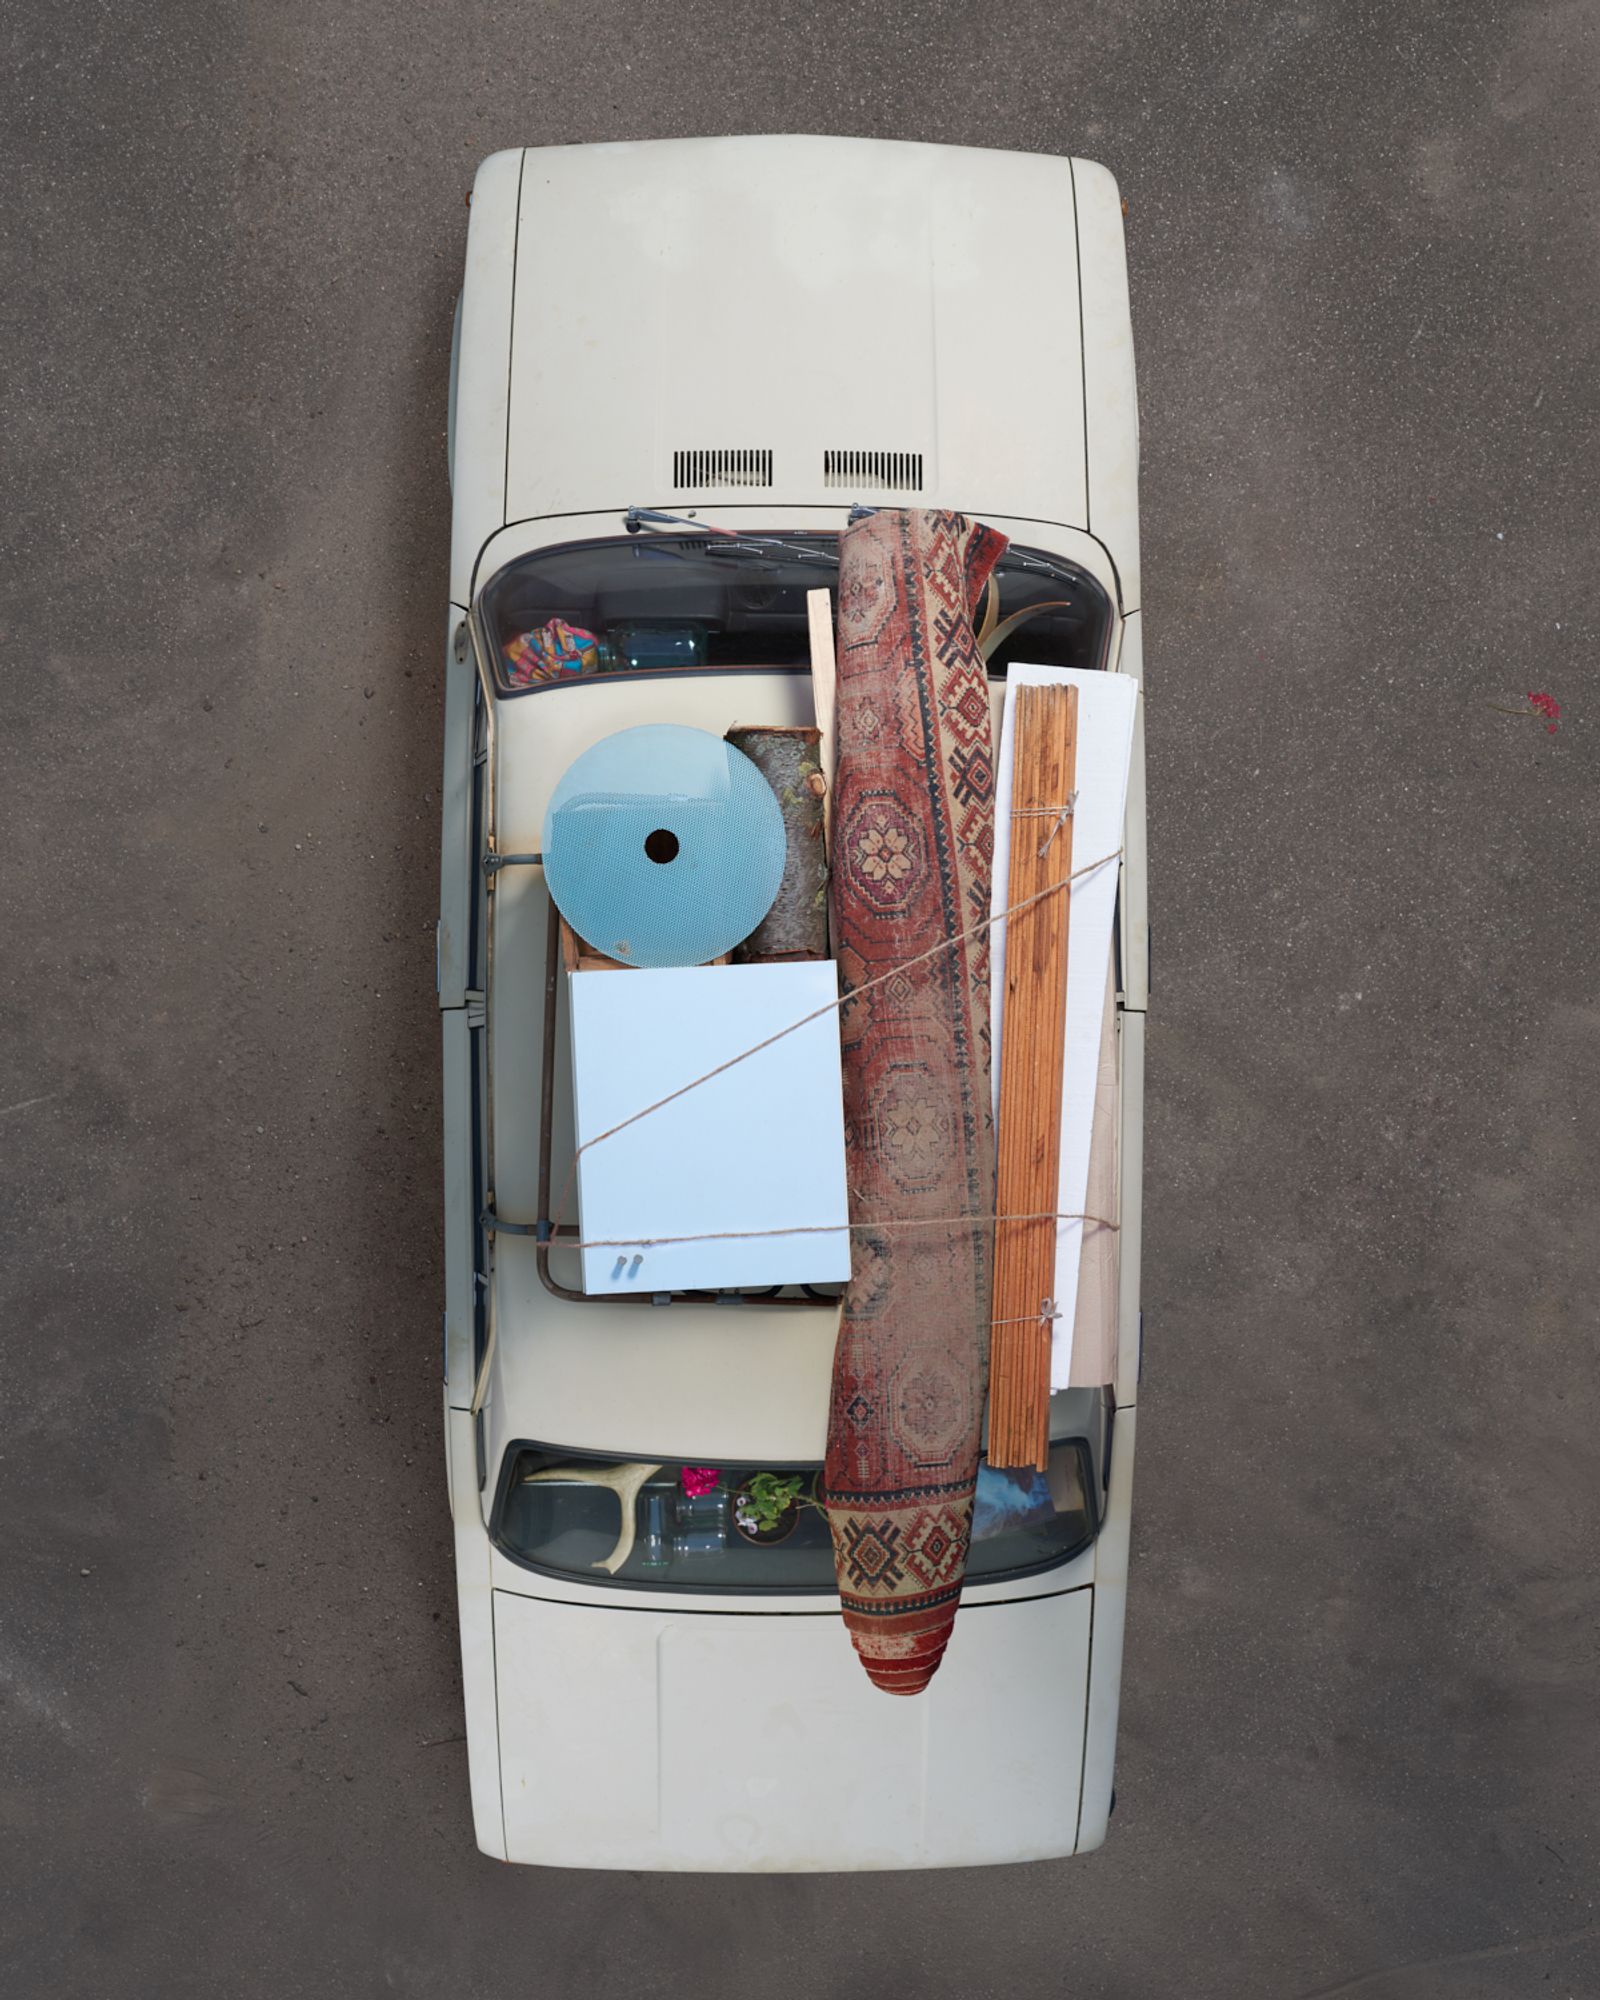 © Alexey Shlyk - As nothing could be thrown away, car was a great place to store material on the way to the summer house.